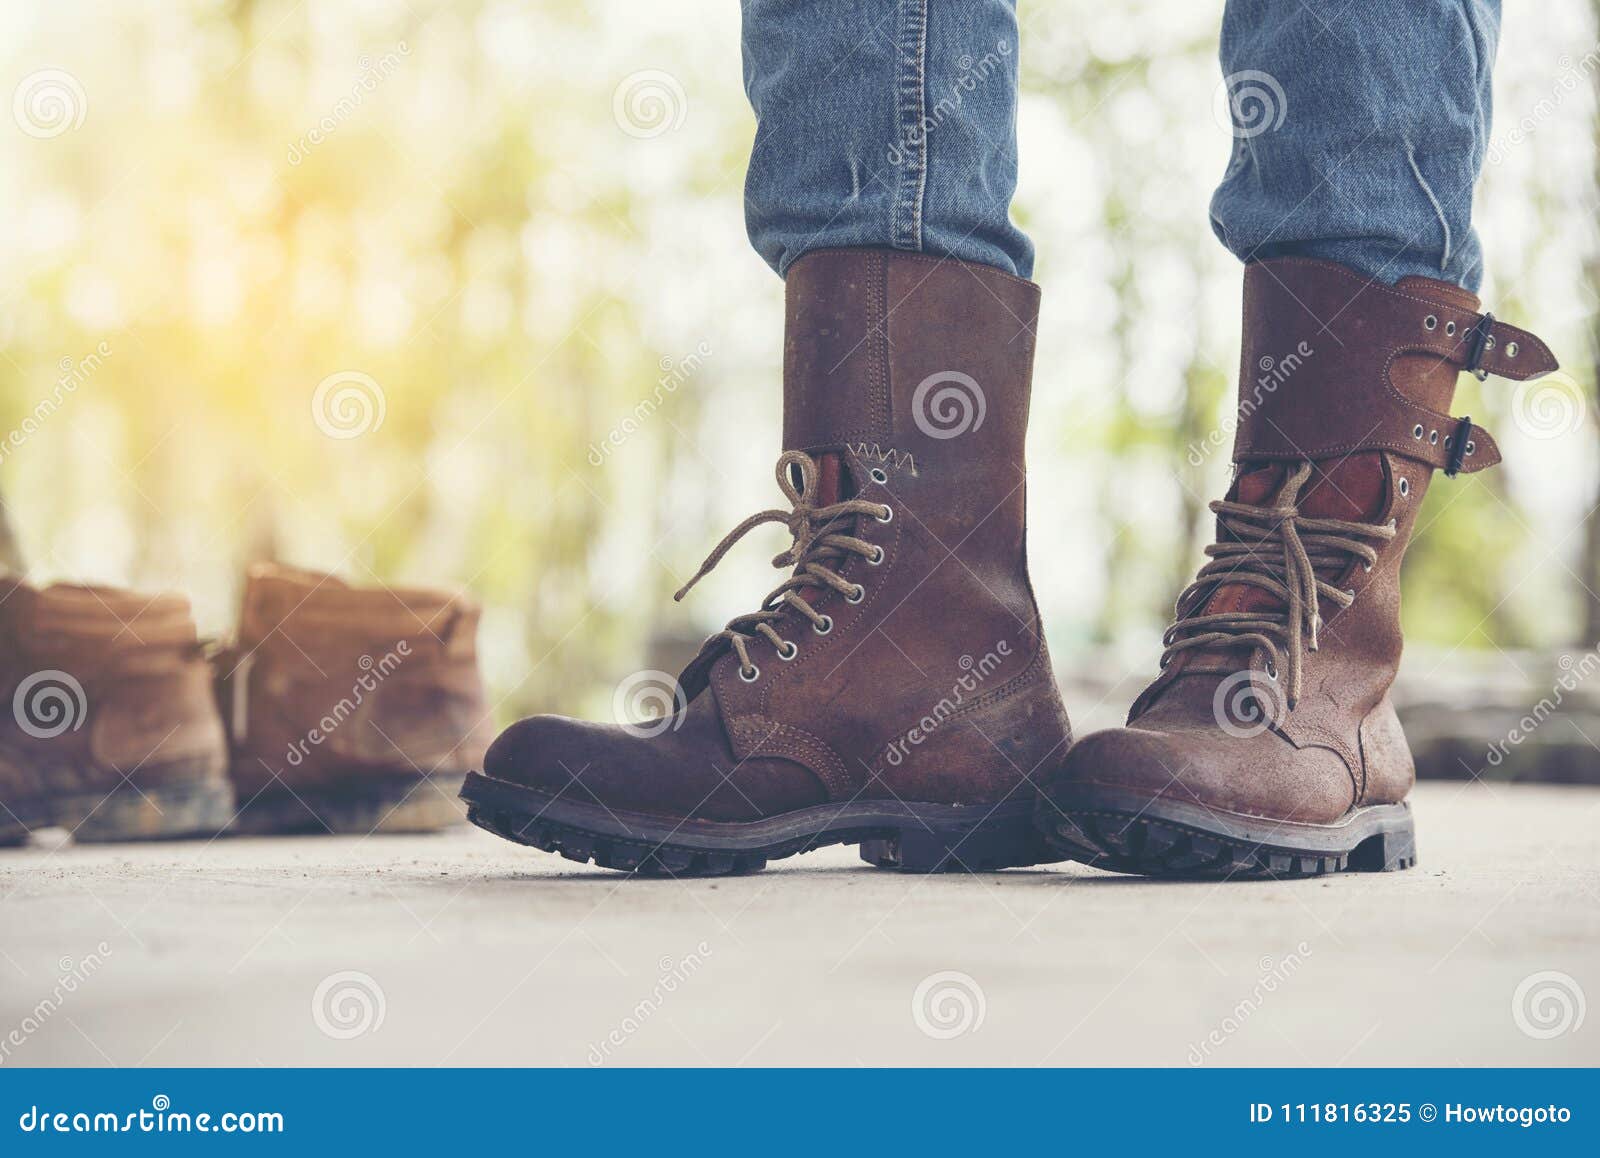 Man Wear a Brown Boots and Jeans Stock Image - Image of boots, fashion:  111816325